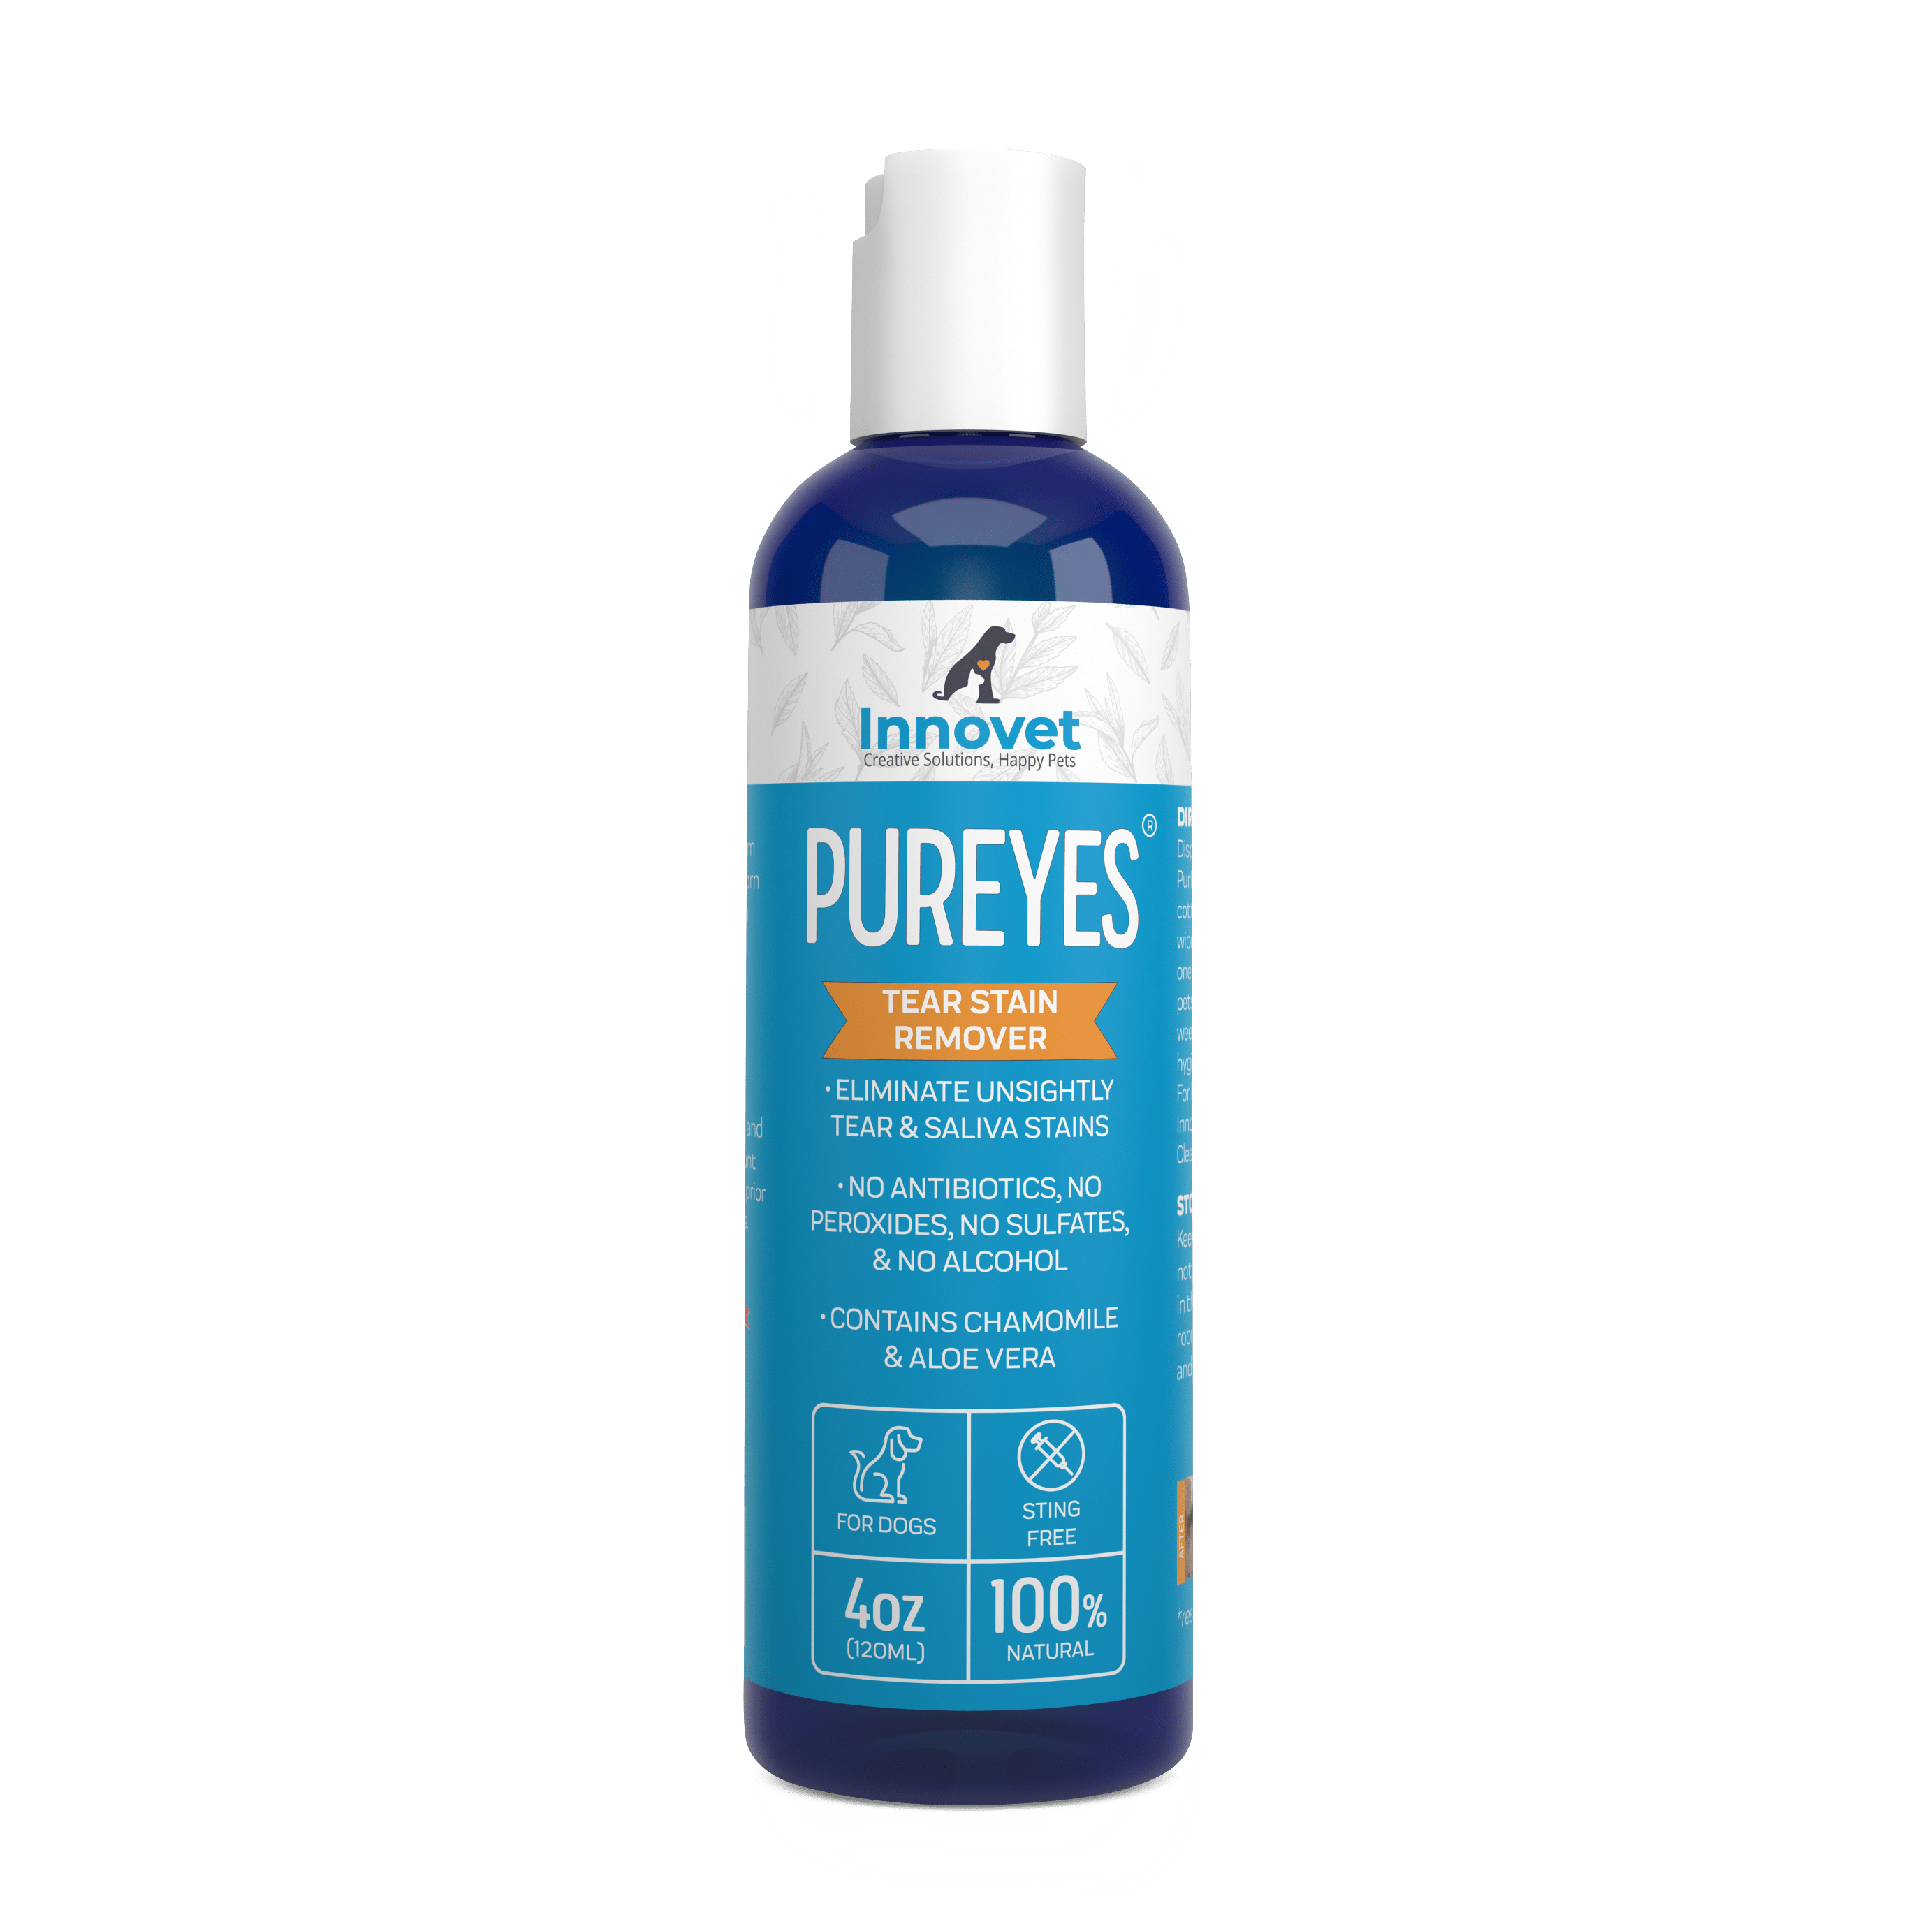 PurEyes Tear Stain Remover for Dogs